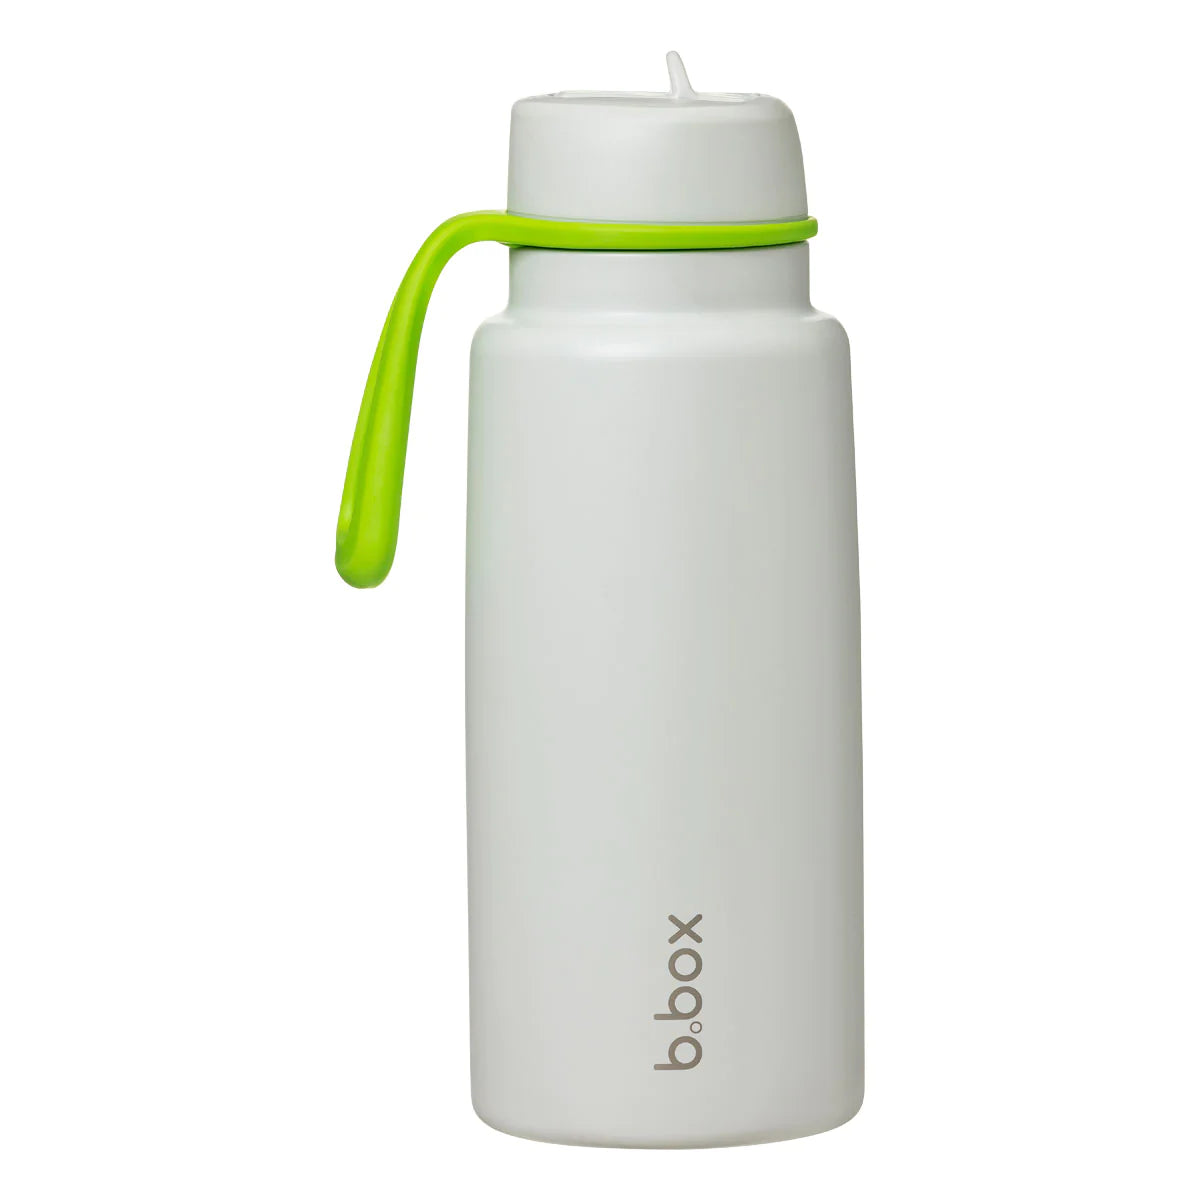 BBOX 1L insulated drink bottle